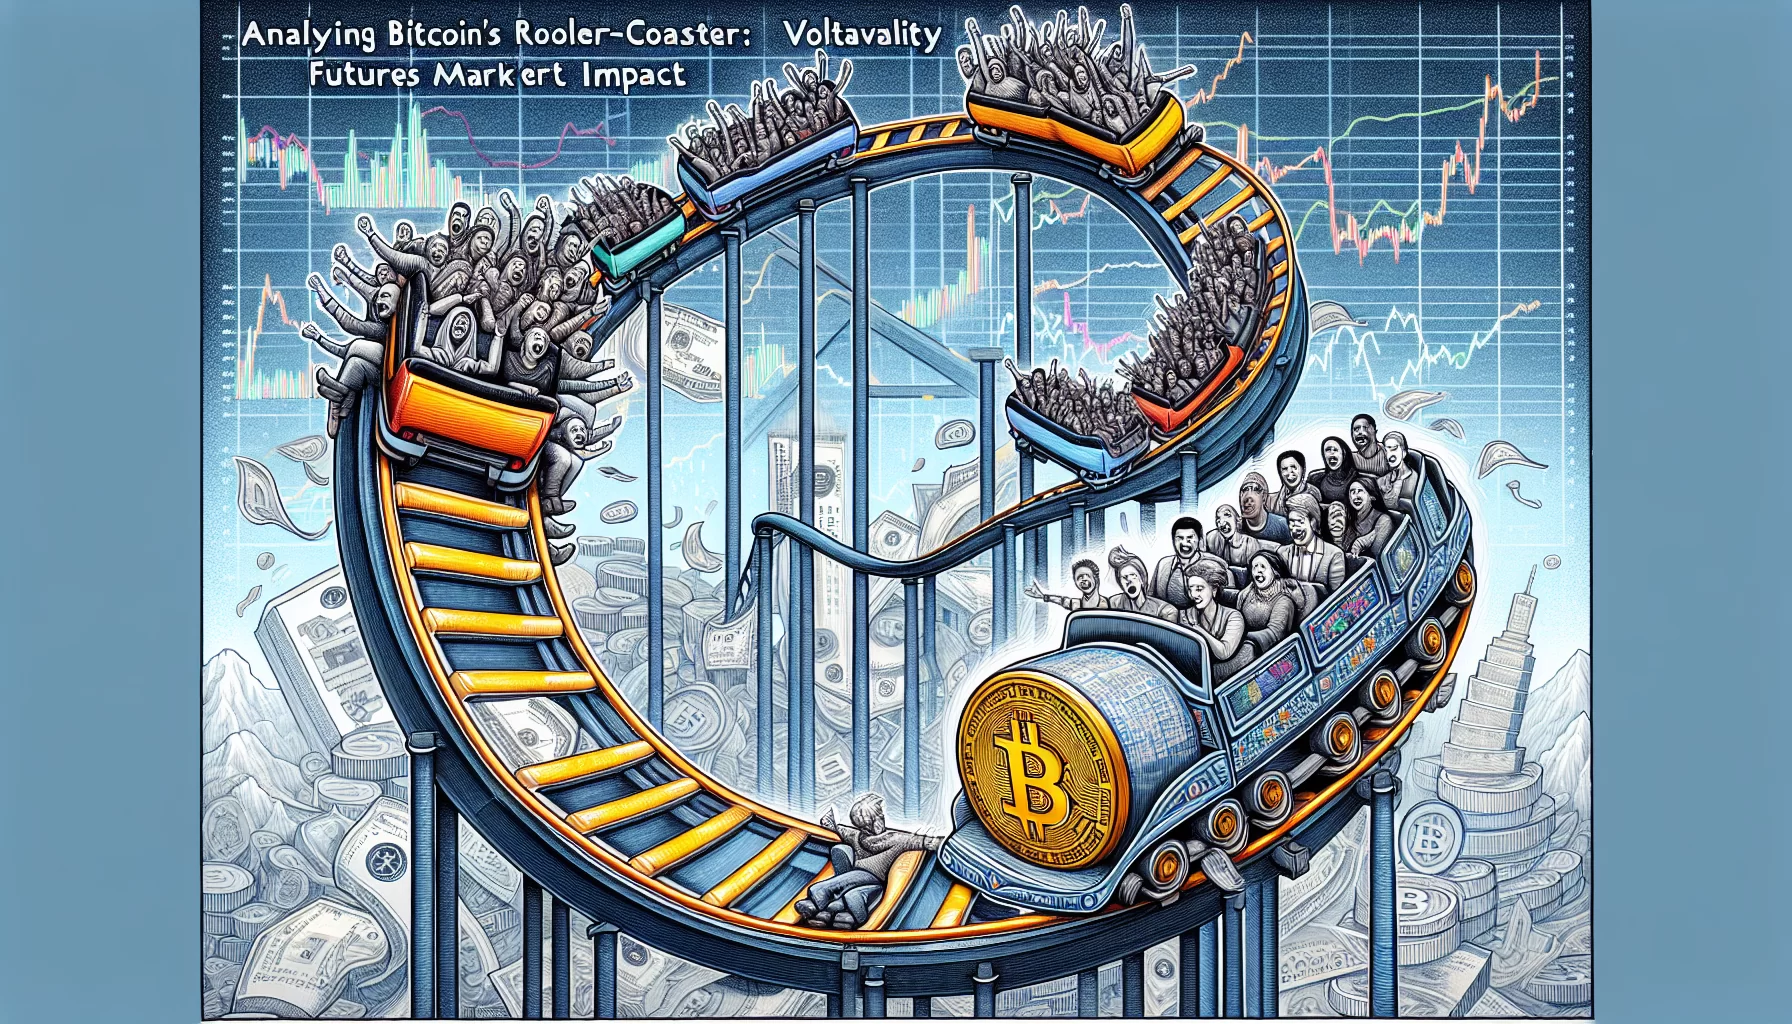 Analyzing bitcoin's roller-coaster week: navigating volatility and futures market impact